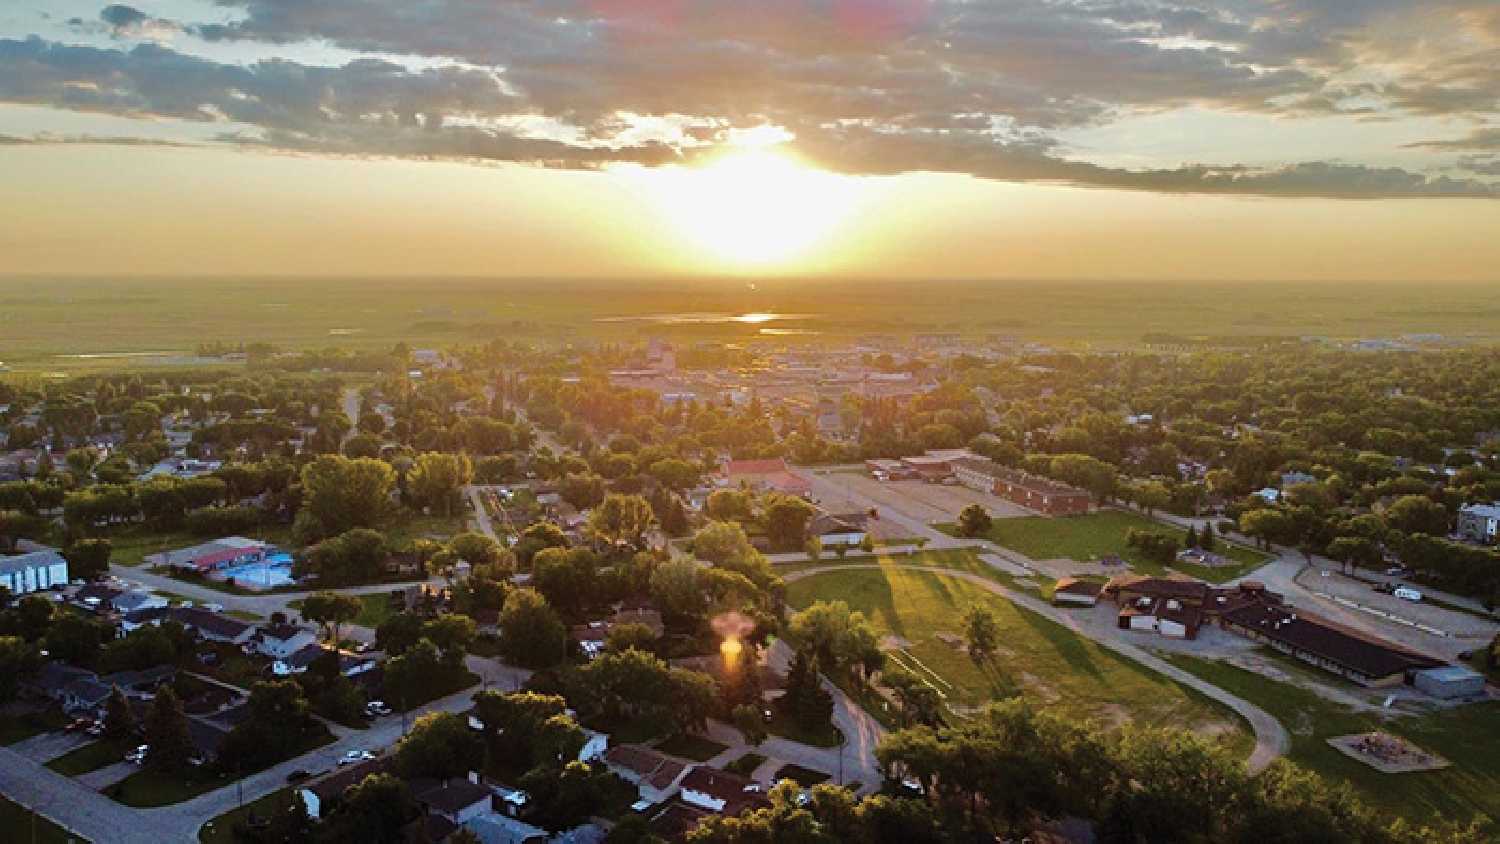 Sam Mattie named Moosomin as one of the top five places to live in Saskatchewan. Kevin Weedmark took this photo of a sunrise in Moosomin last summer.